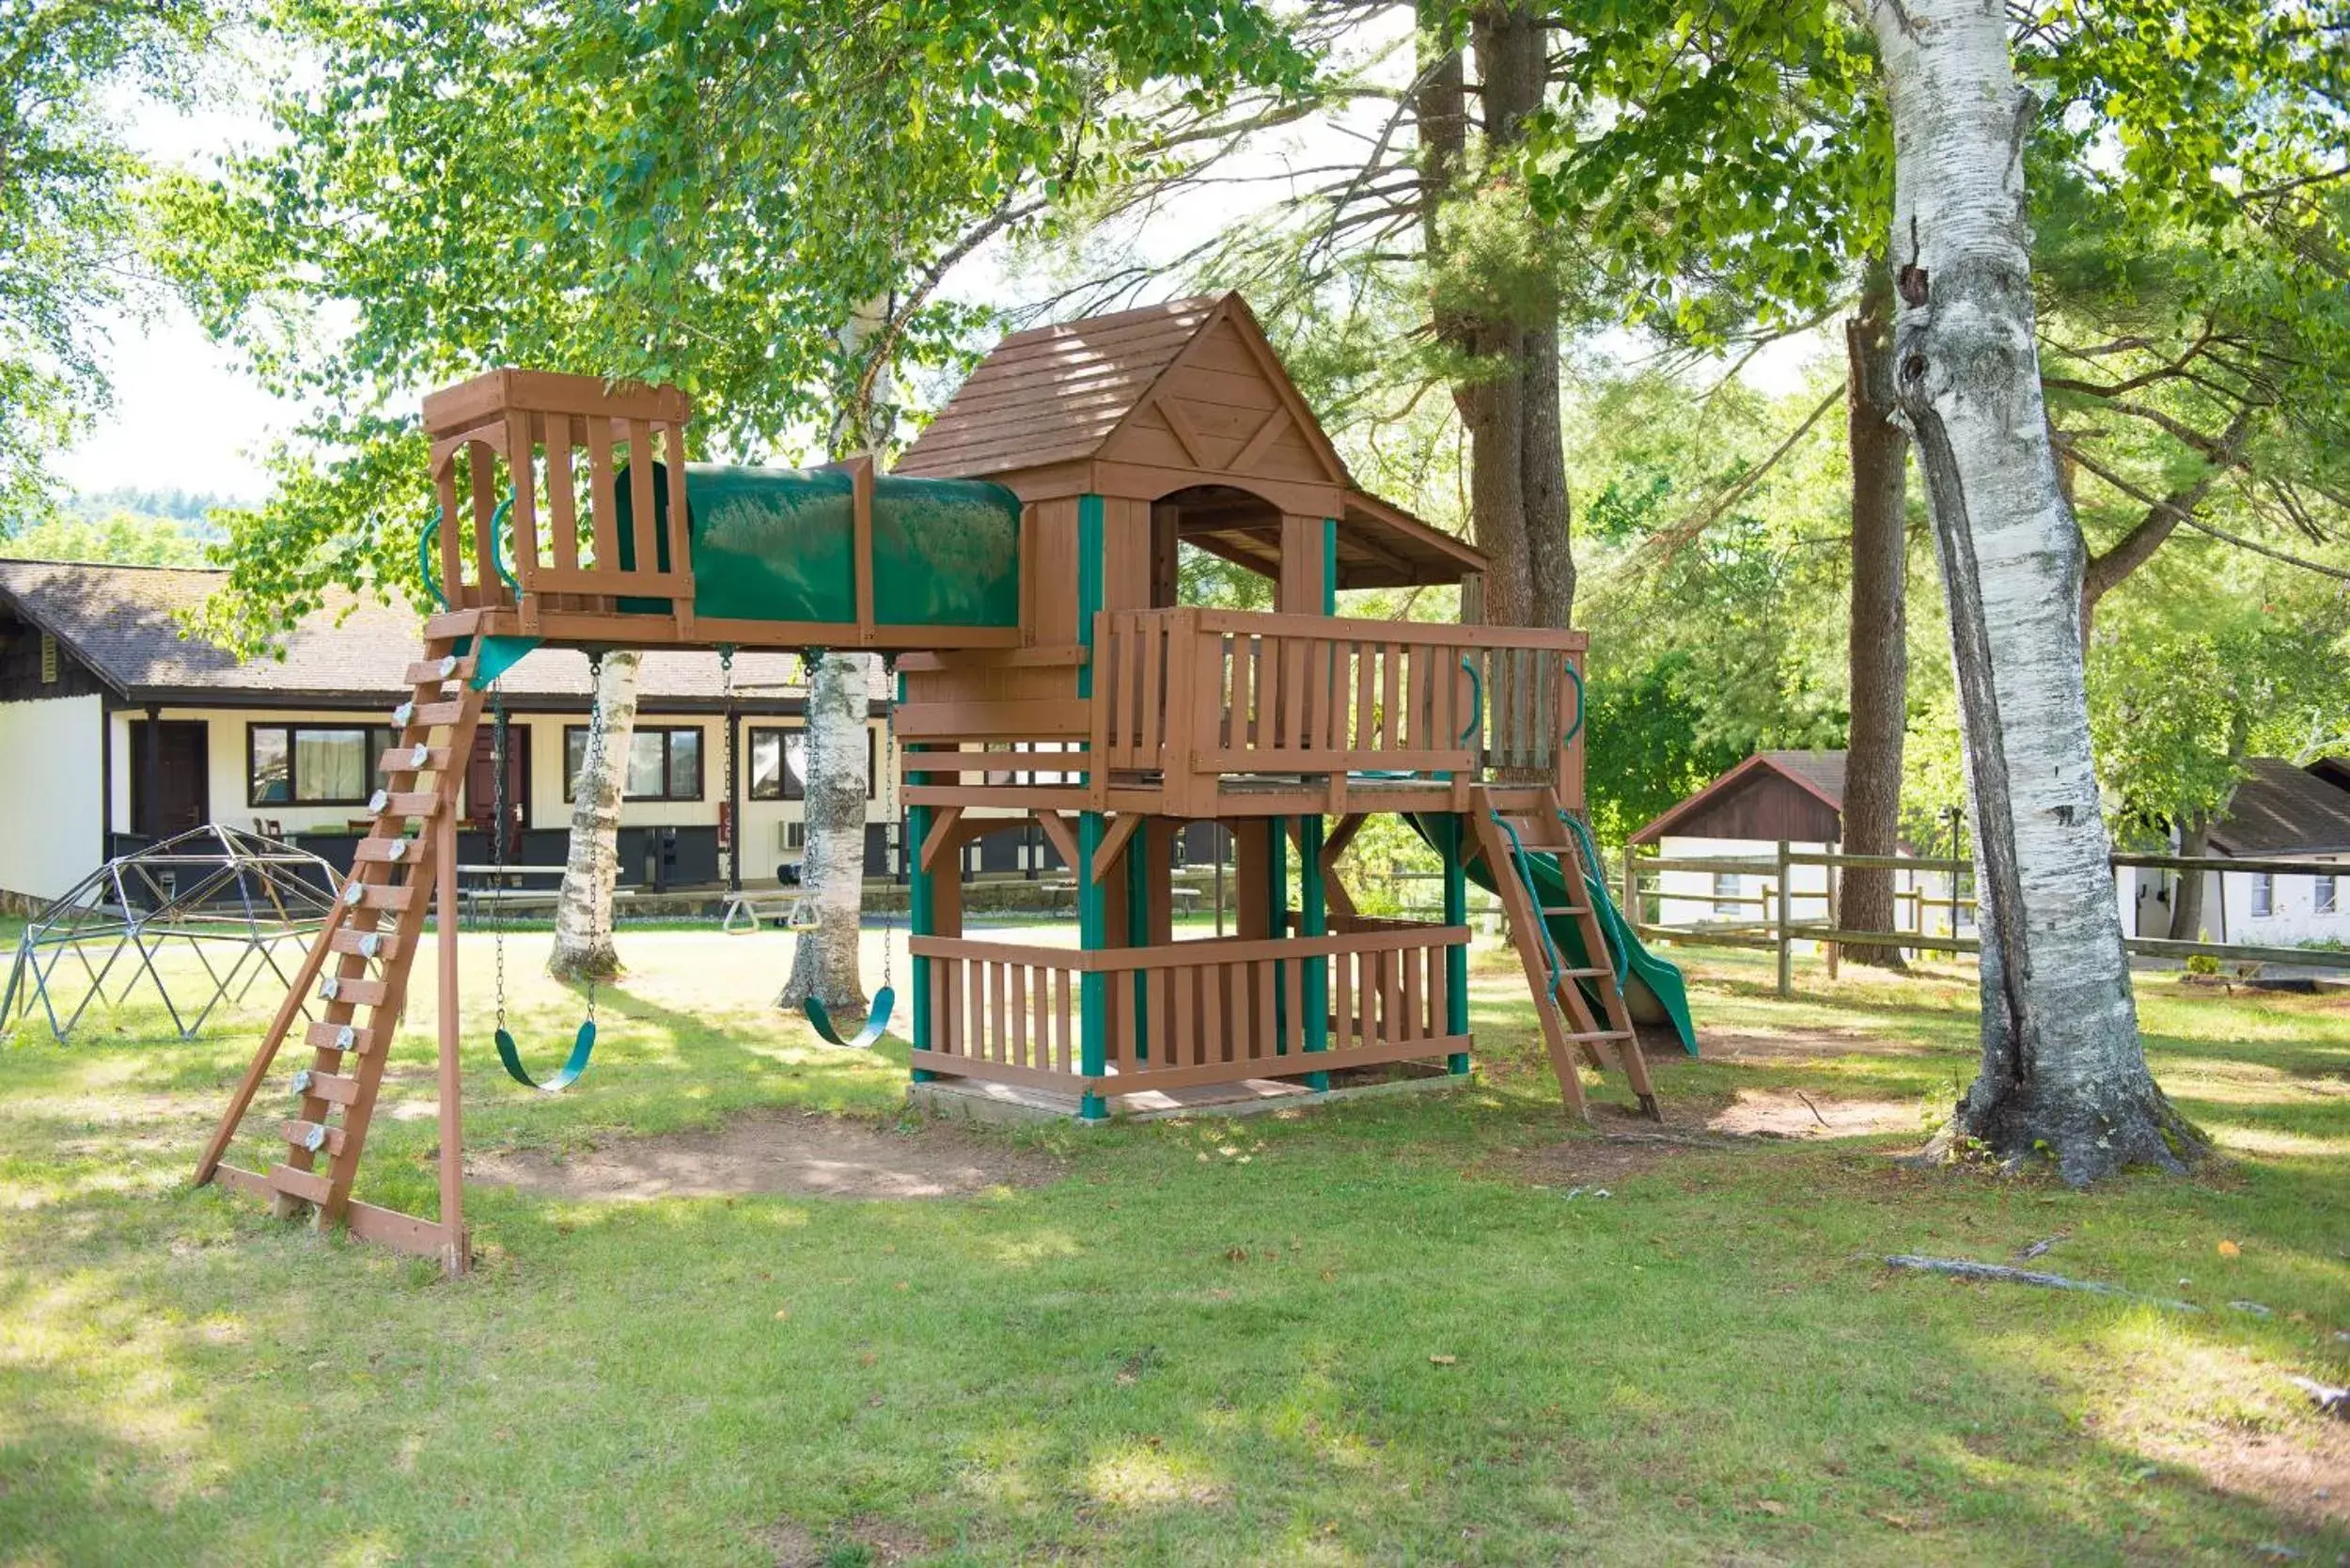 Children play ground, Children's Play Area in Bayside Resort, Lake George NY